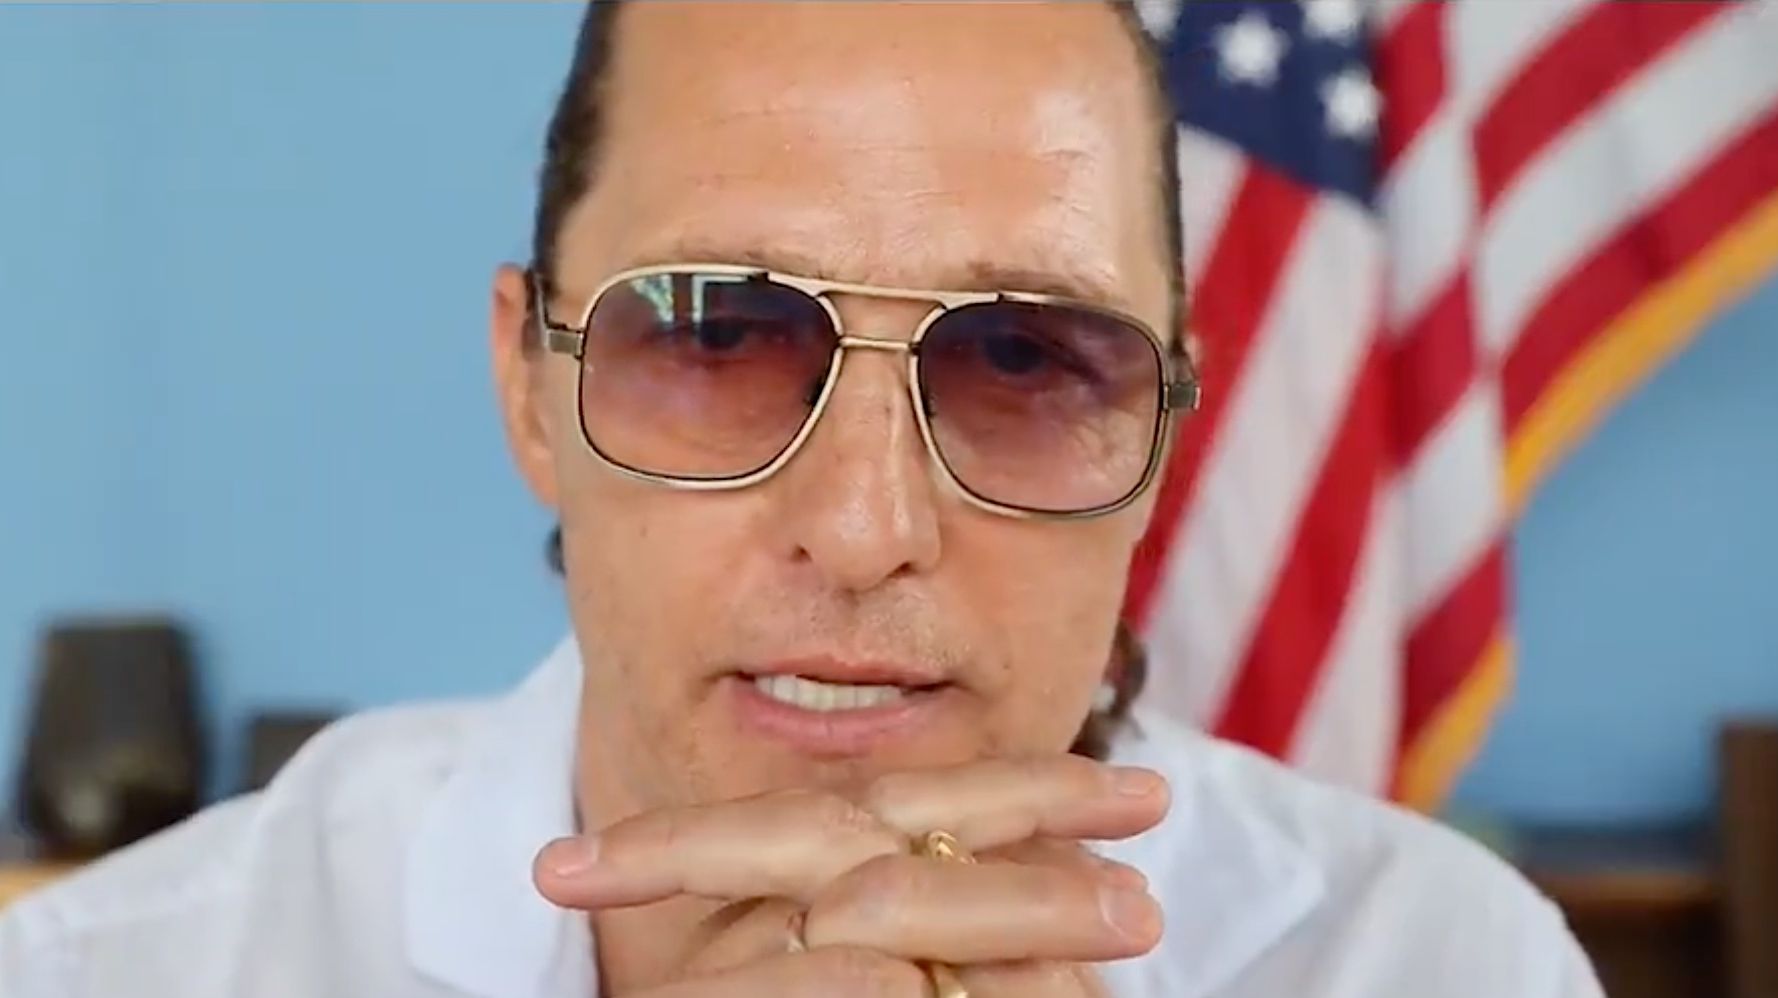 Matthew McConaughey Sends Out Weird July 4 ‘American Puberty’ Message